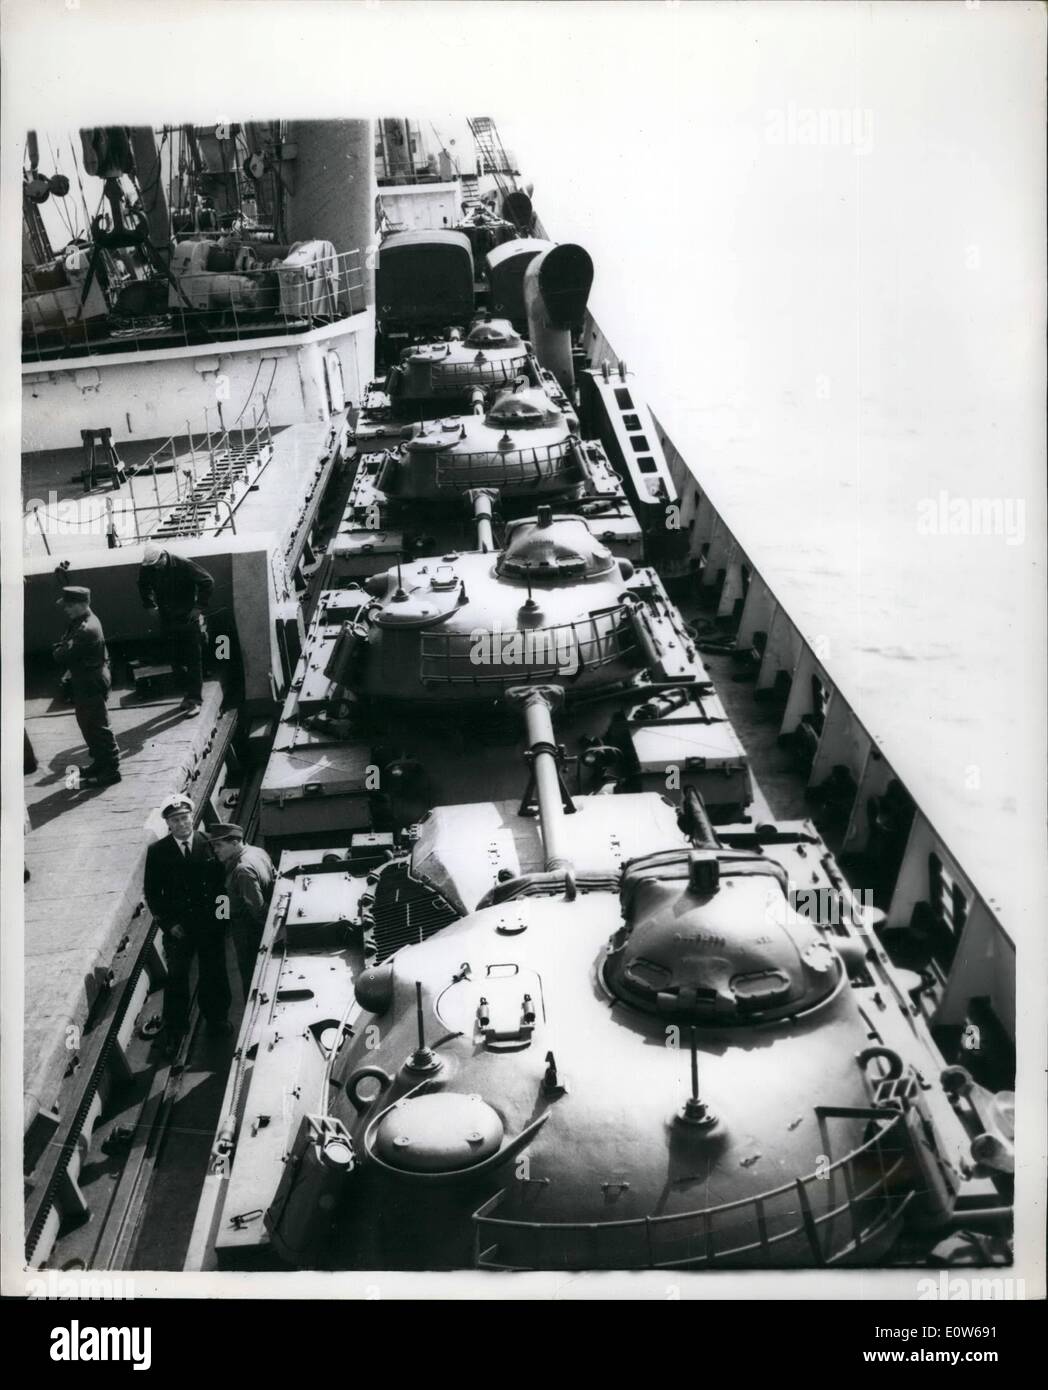 Aug. 08, 1961 - American Tanks Arrive For German Troops Training In Castlemartin In England: Tanks destined for the German Panzer troops who will be training at Castlemartin, Wales, arrived aboard the German steamer Trautenfel, now anchored off Milford Haven. Photo shows A general view of the American-made ranks aboard the Trautenfel. Stock Photo